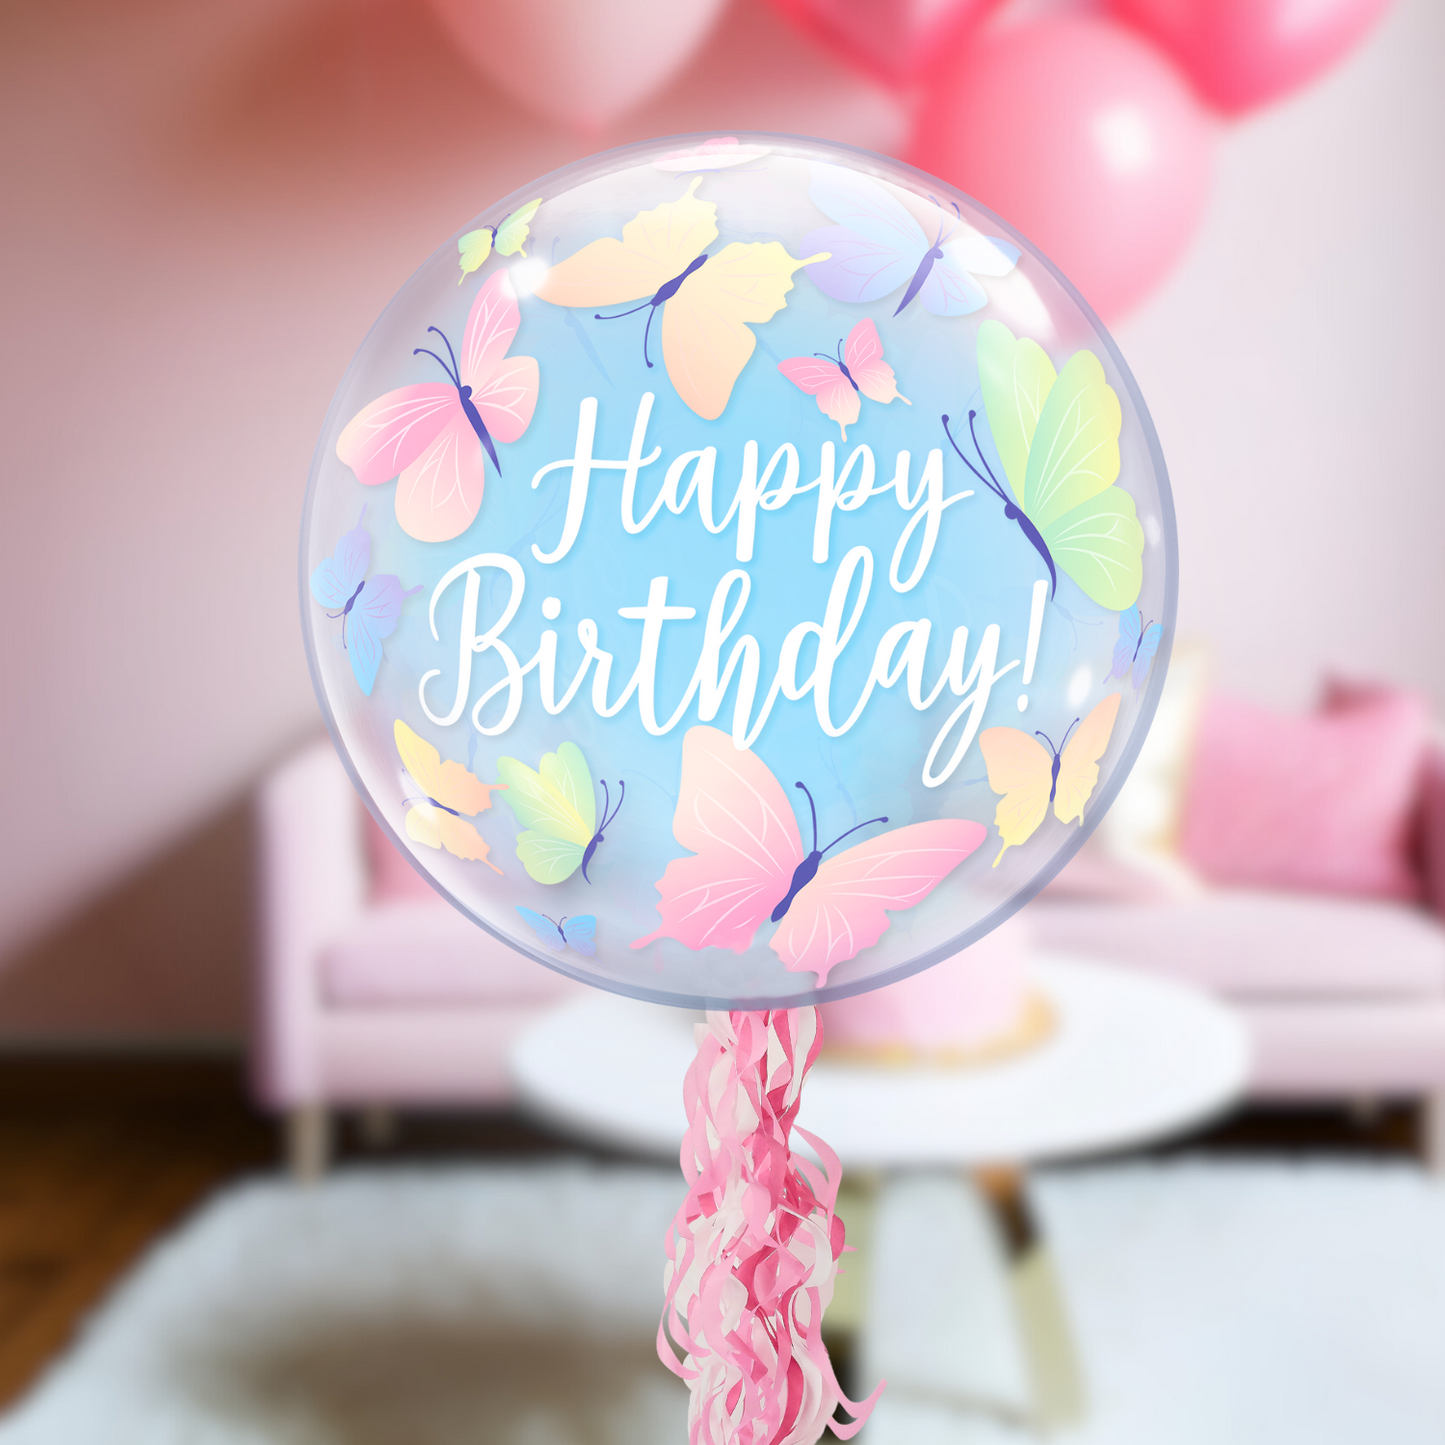 Granny Birthday Pop Up Card & Musical Balloon Surprise Delivered In A Box